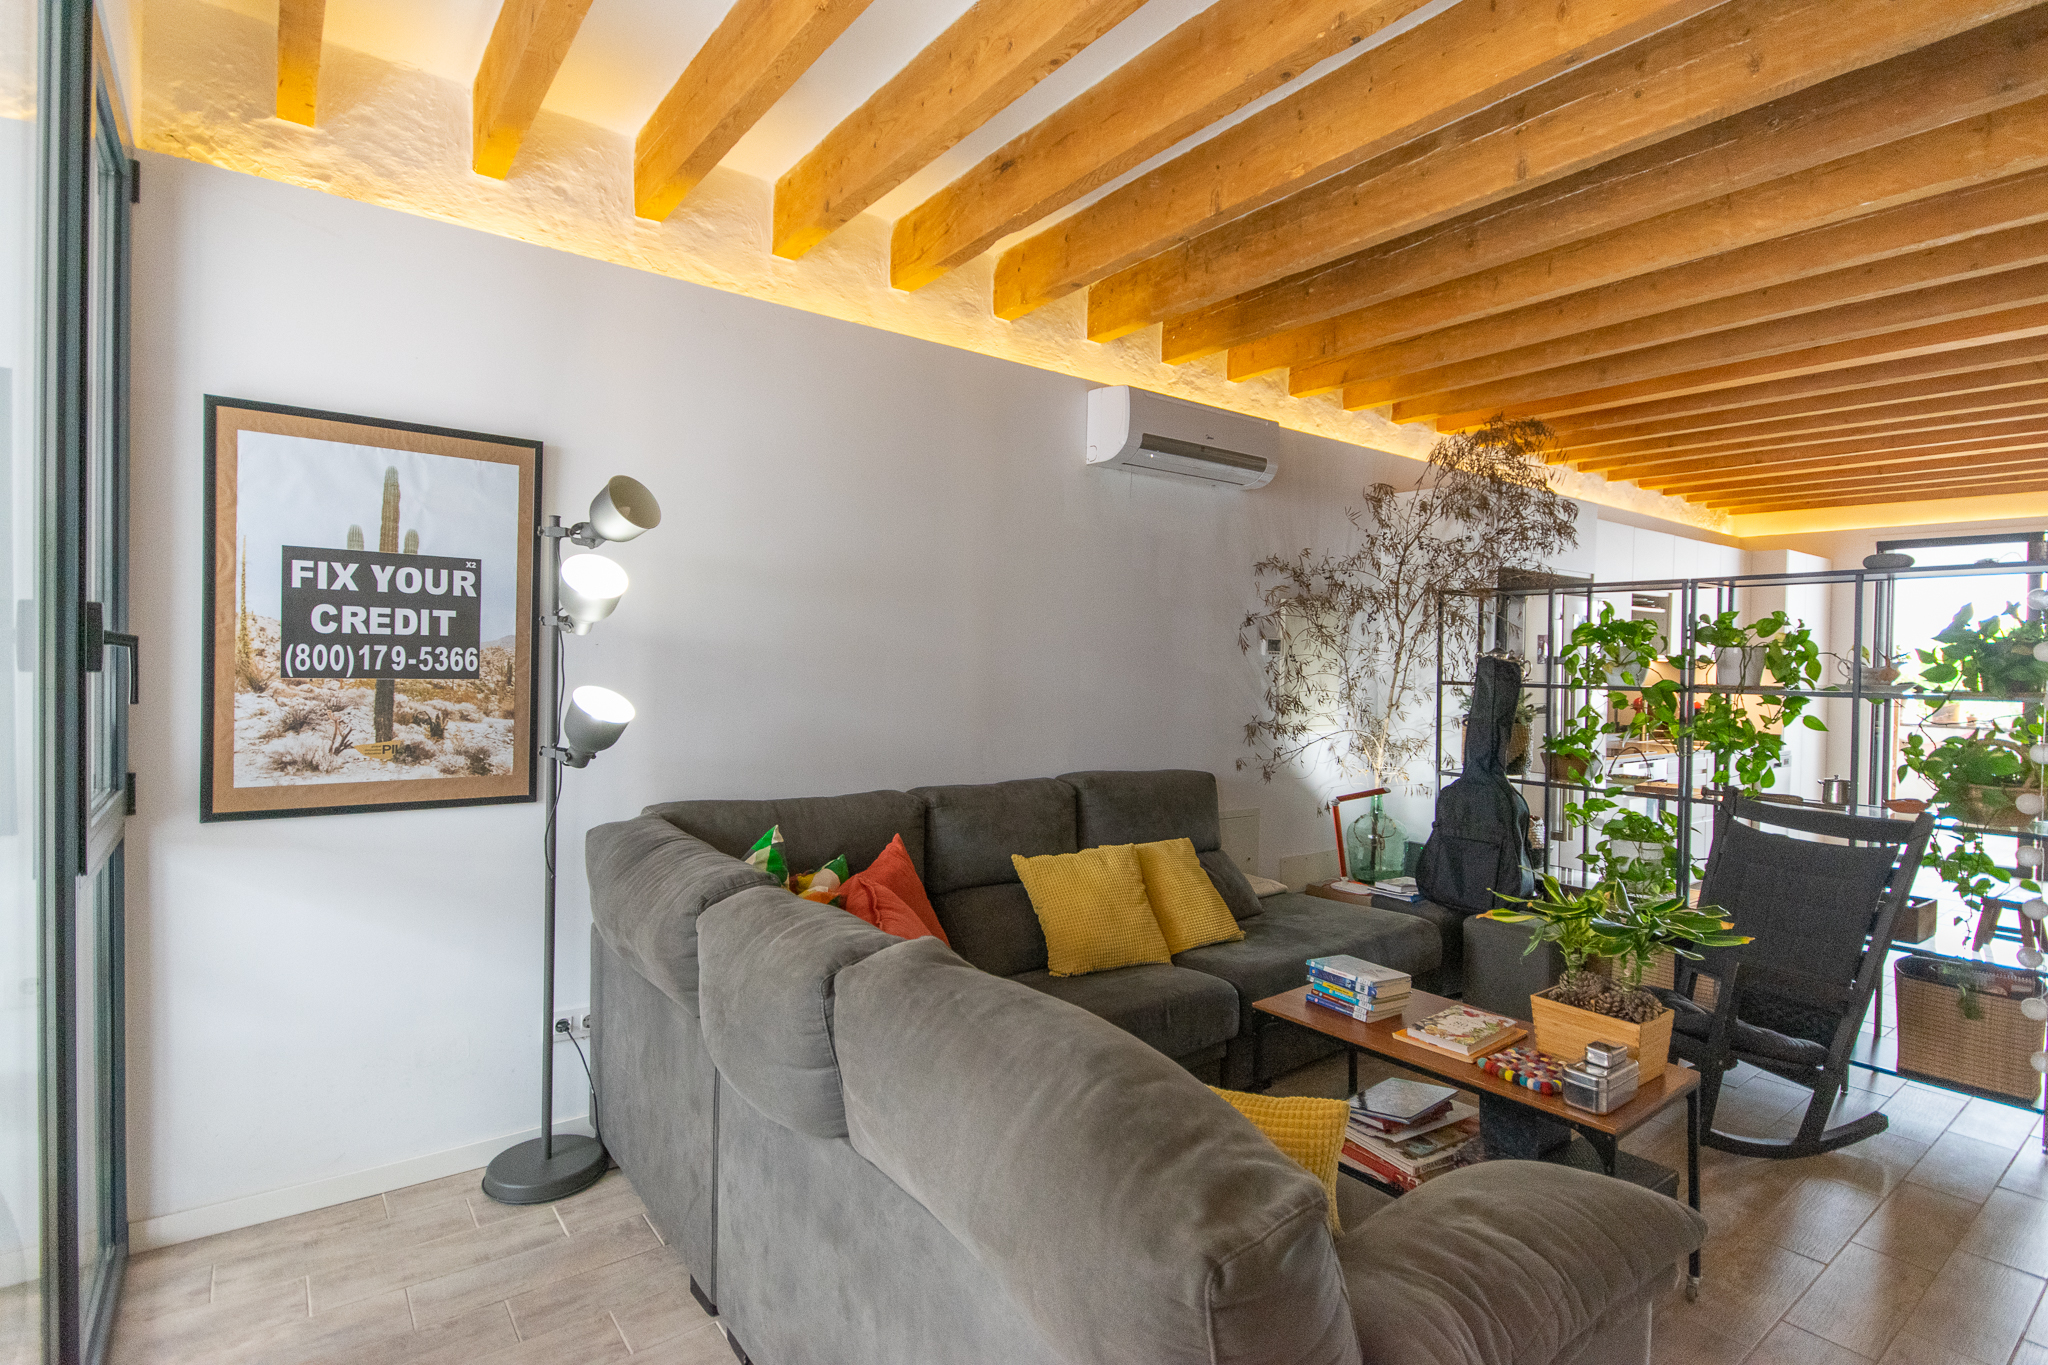 Living room in charming renovated house with 3 bedrooms in Alaior